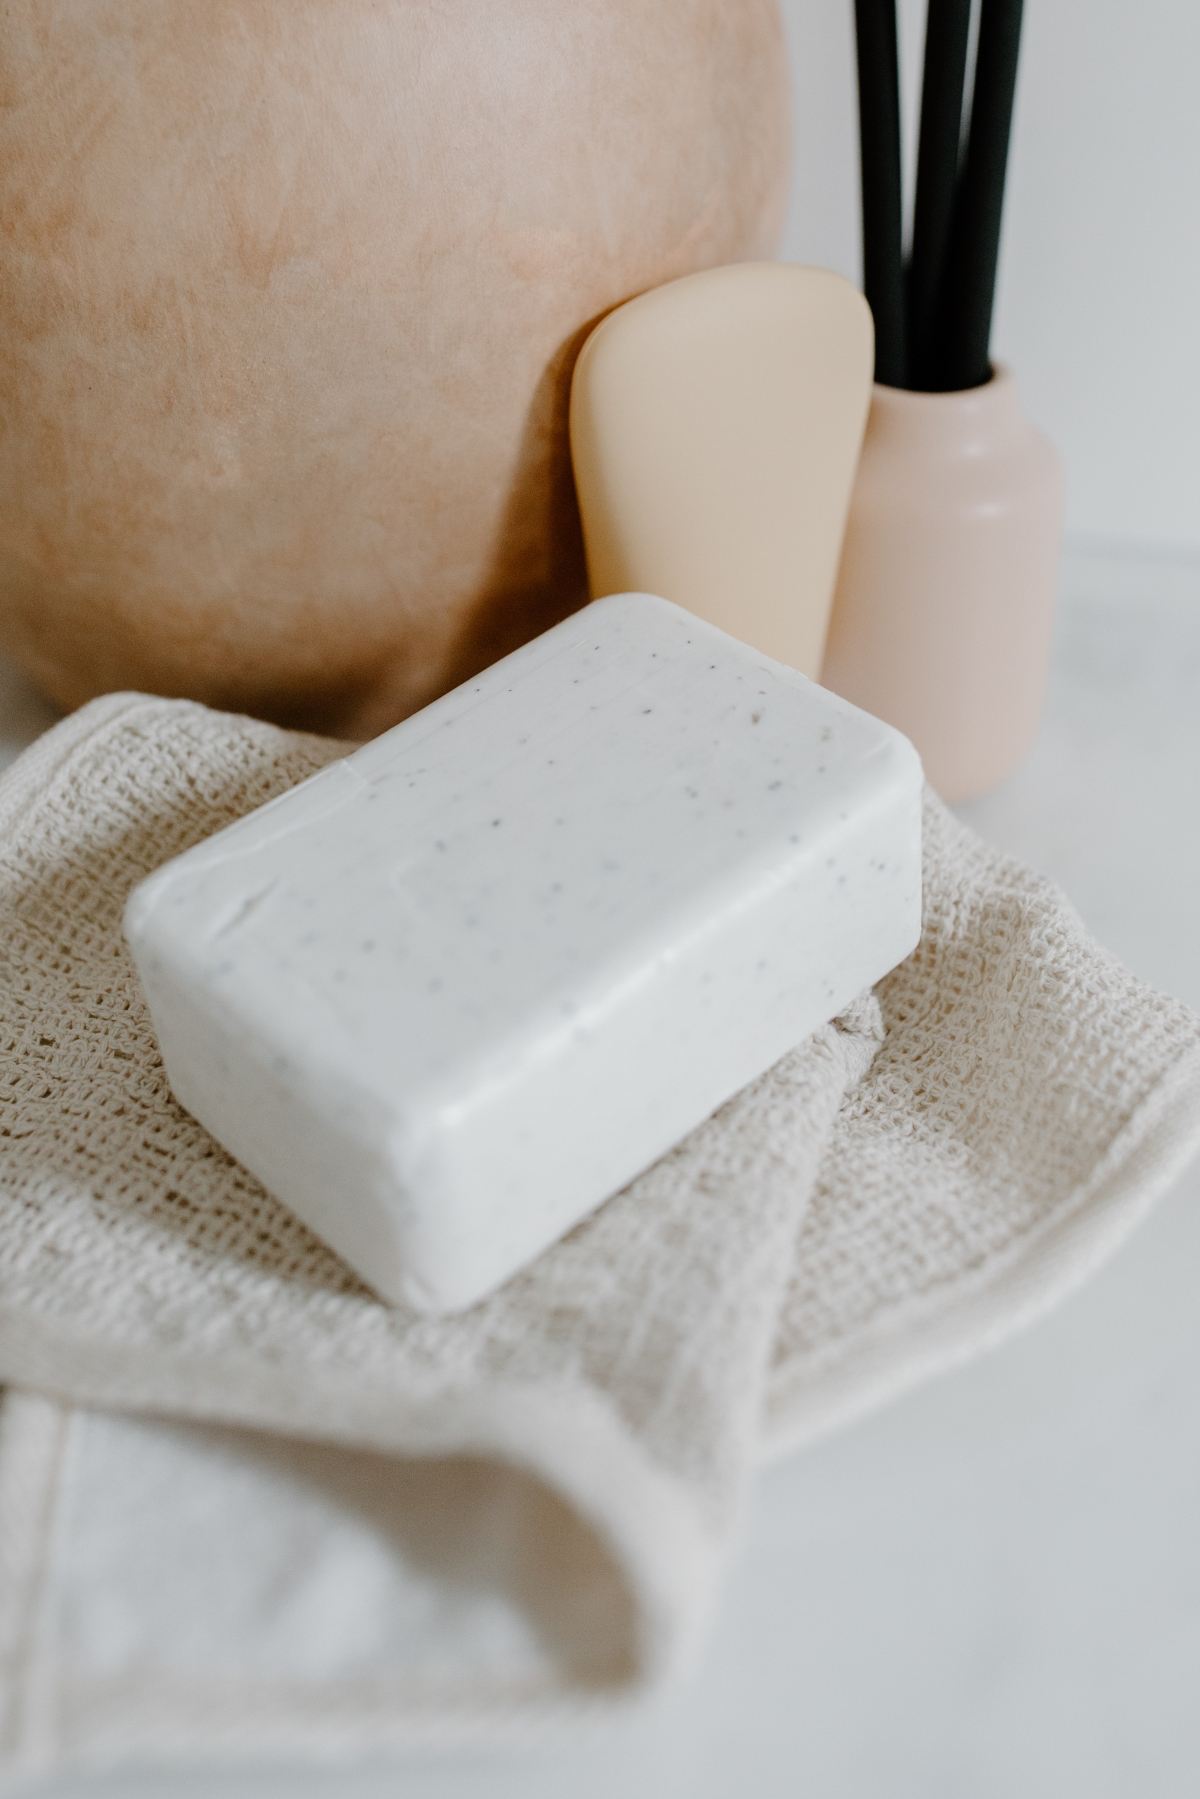 soap bar hacks for everyday life